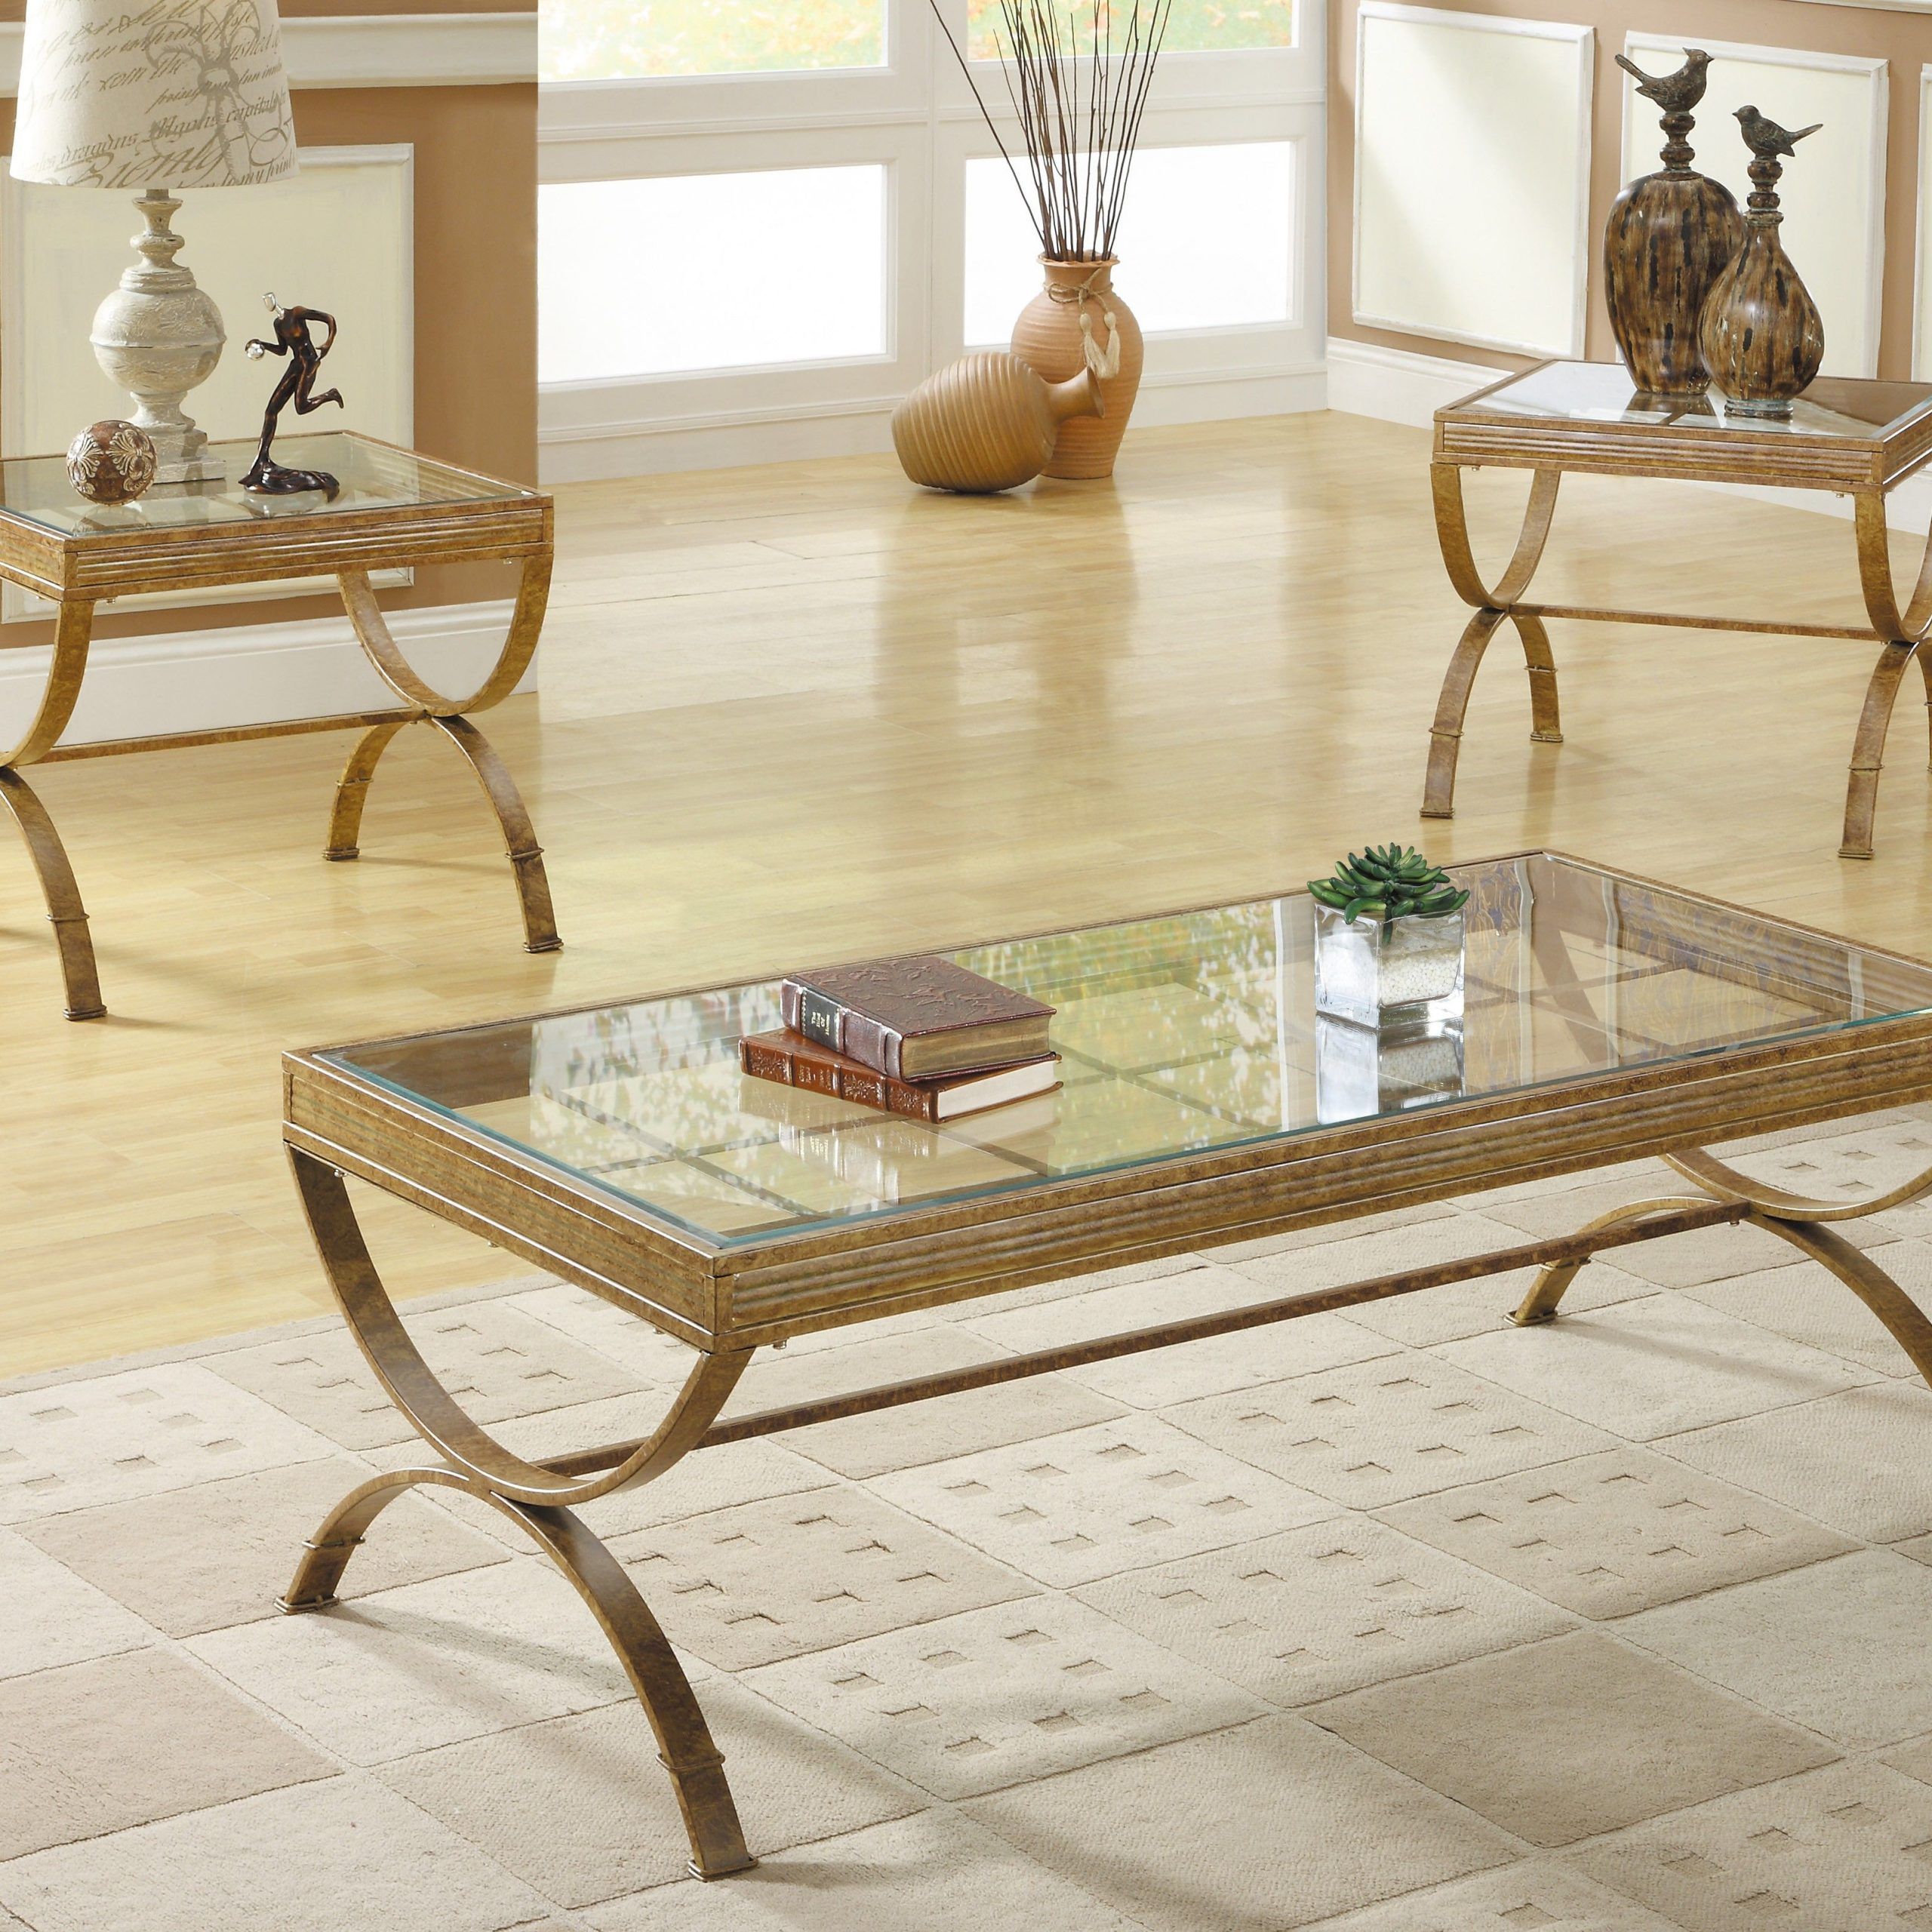 Glass Coffee Table Sets Amazon / Ashley Furniture Signature Design With Glass Top Coffee Tables (View 12 of 15)